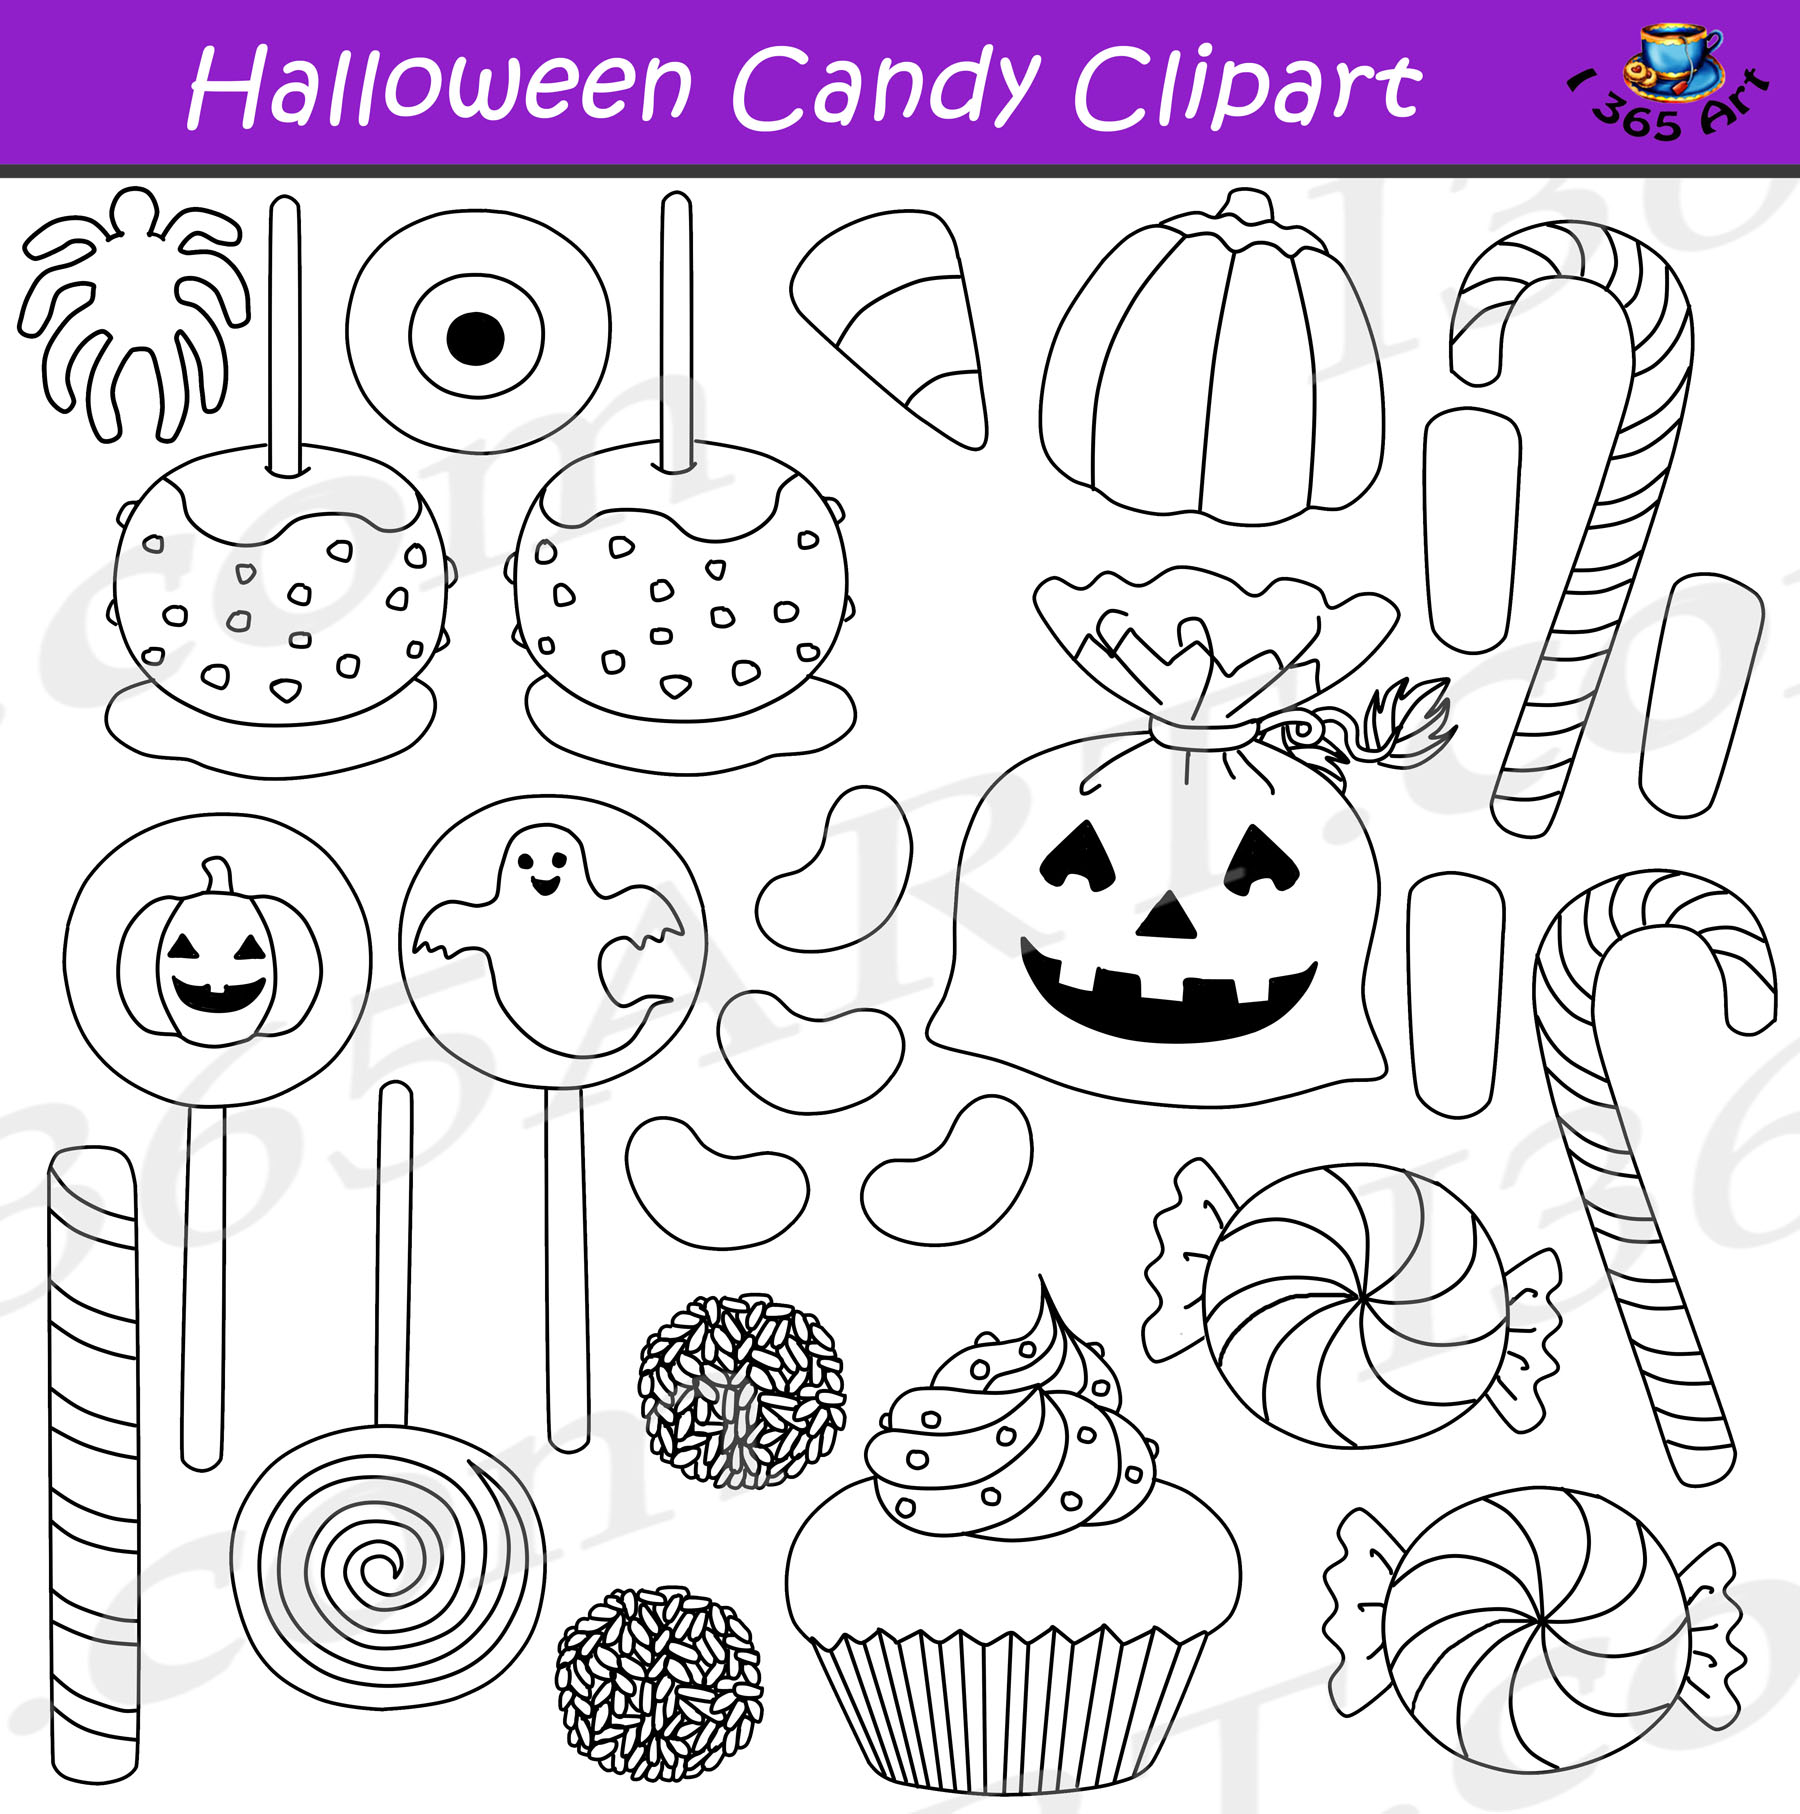 black and white candy clipart